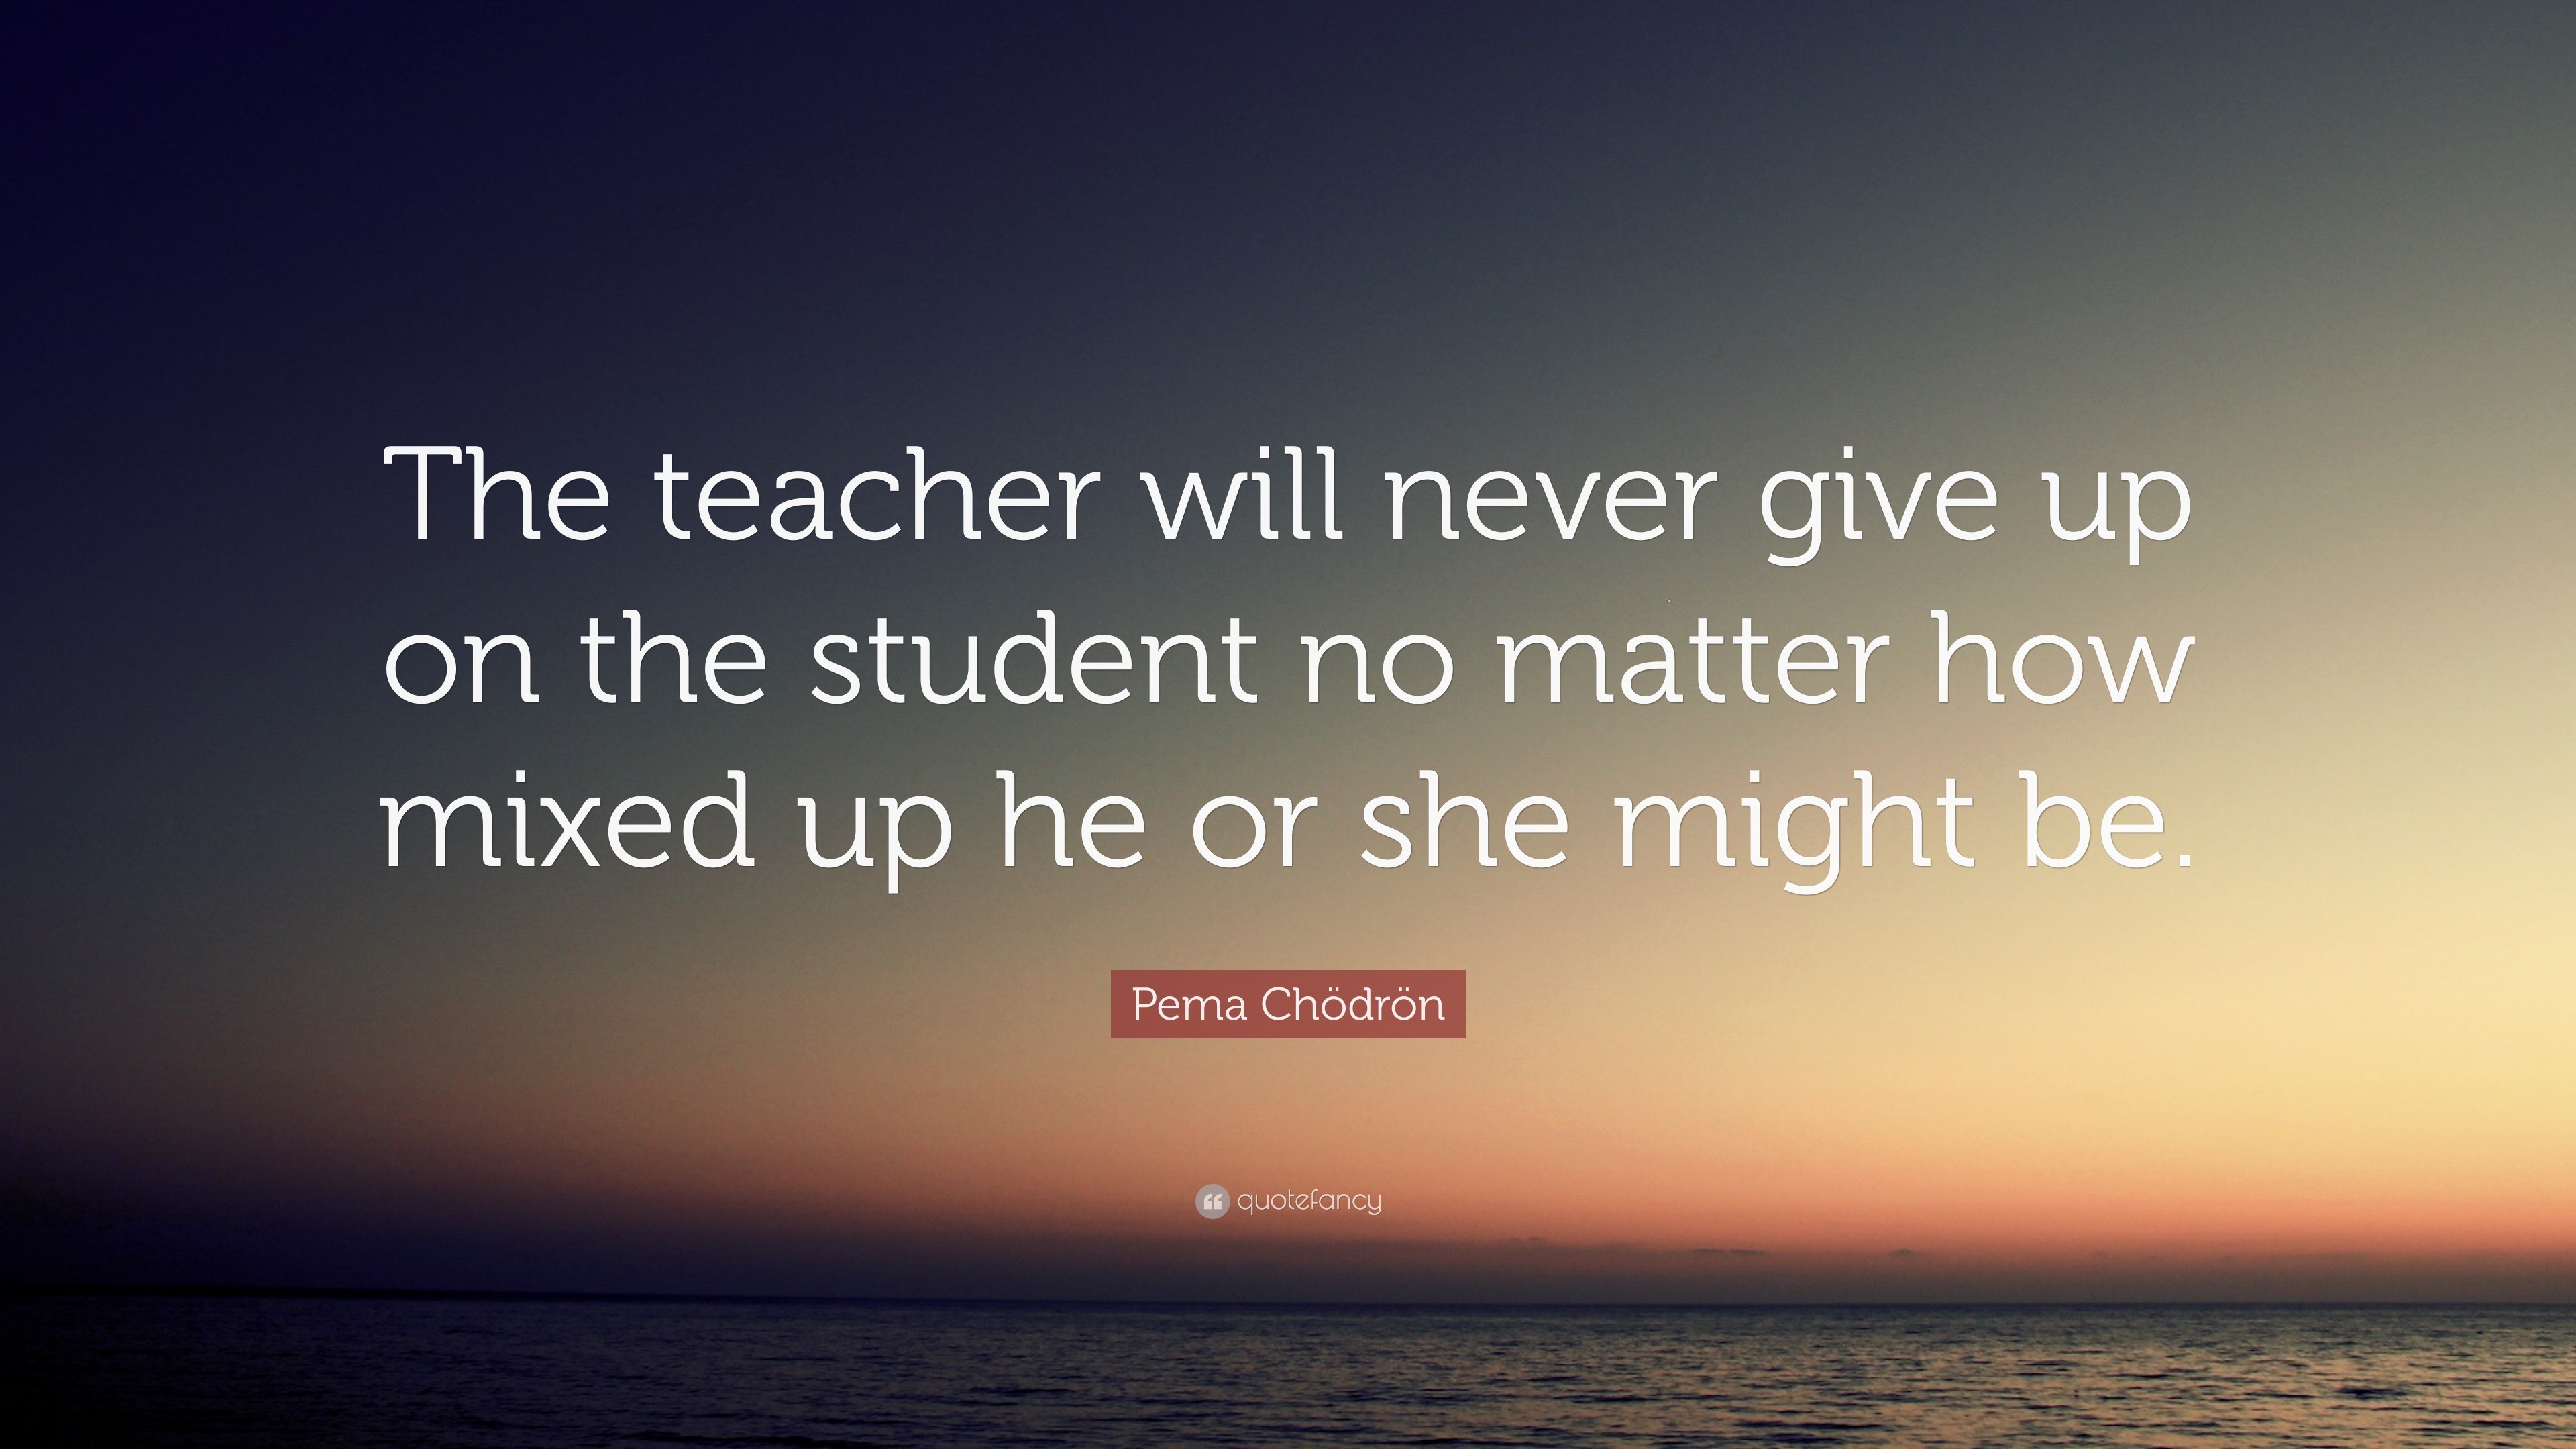 Pema Chödrön Quote: “The teacher will never give up on the student no ...